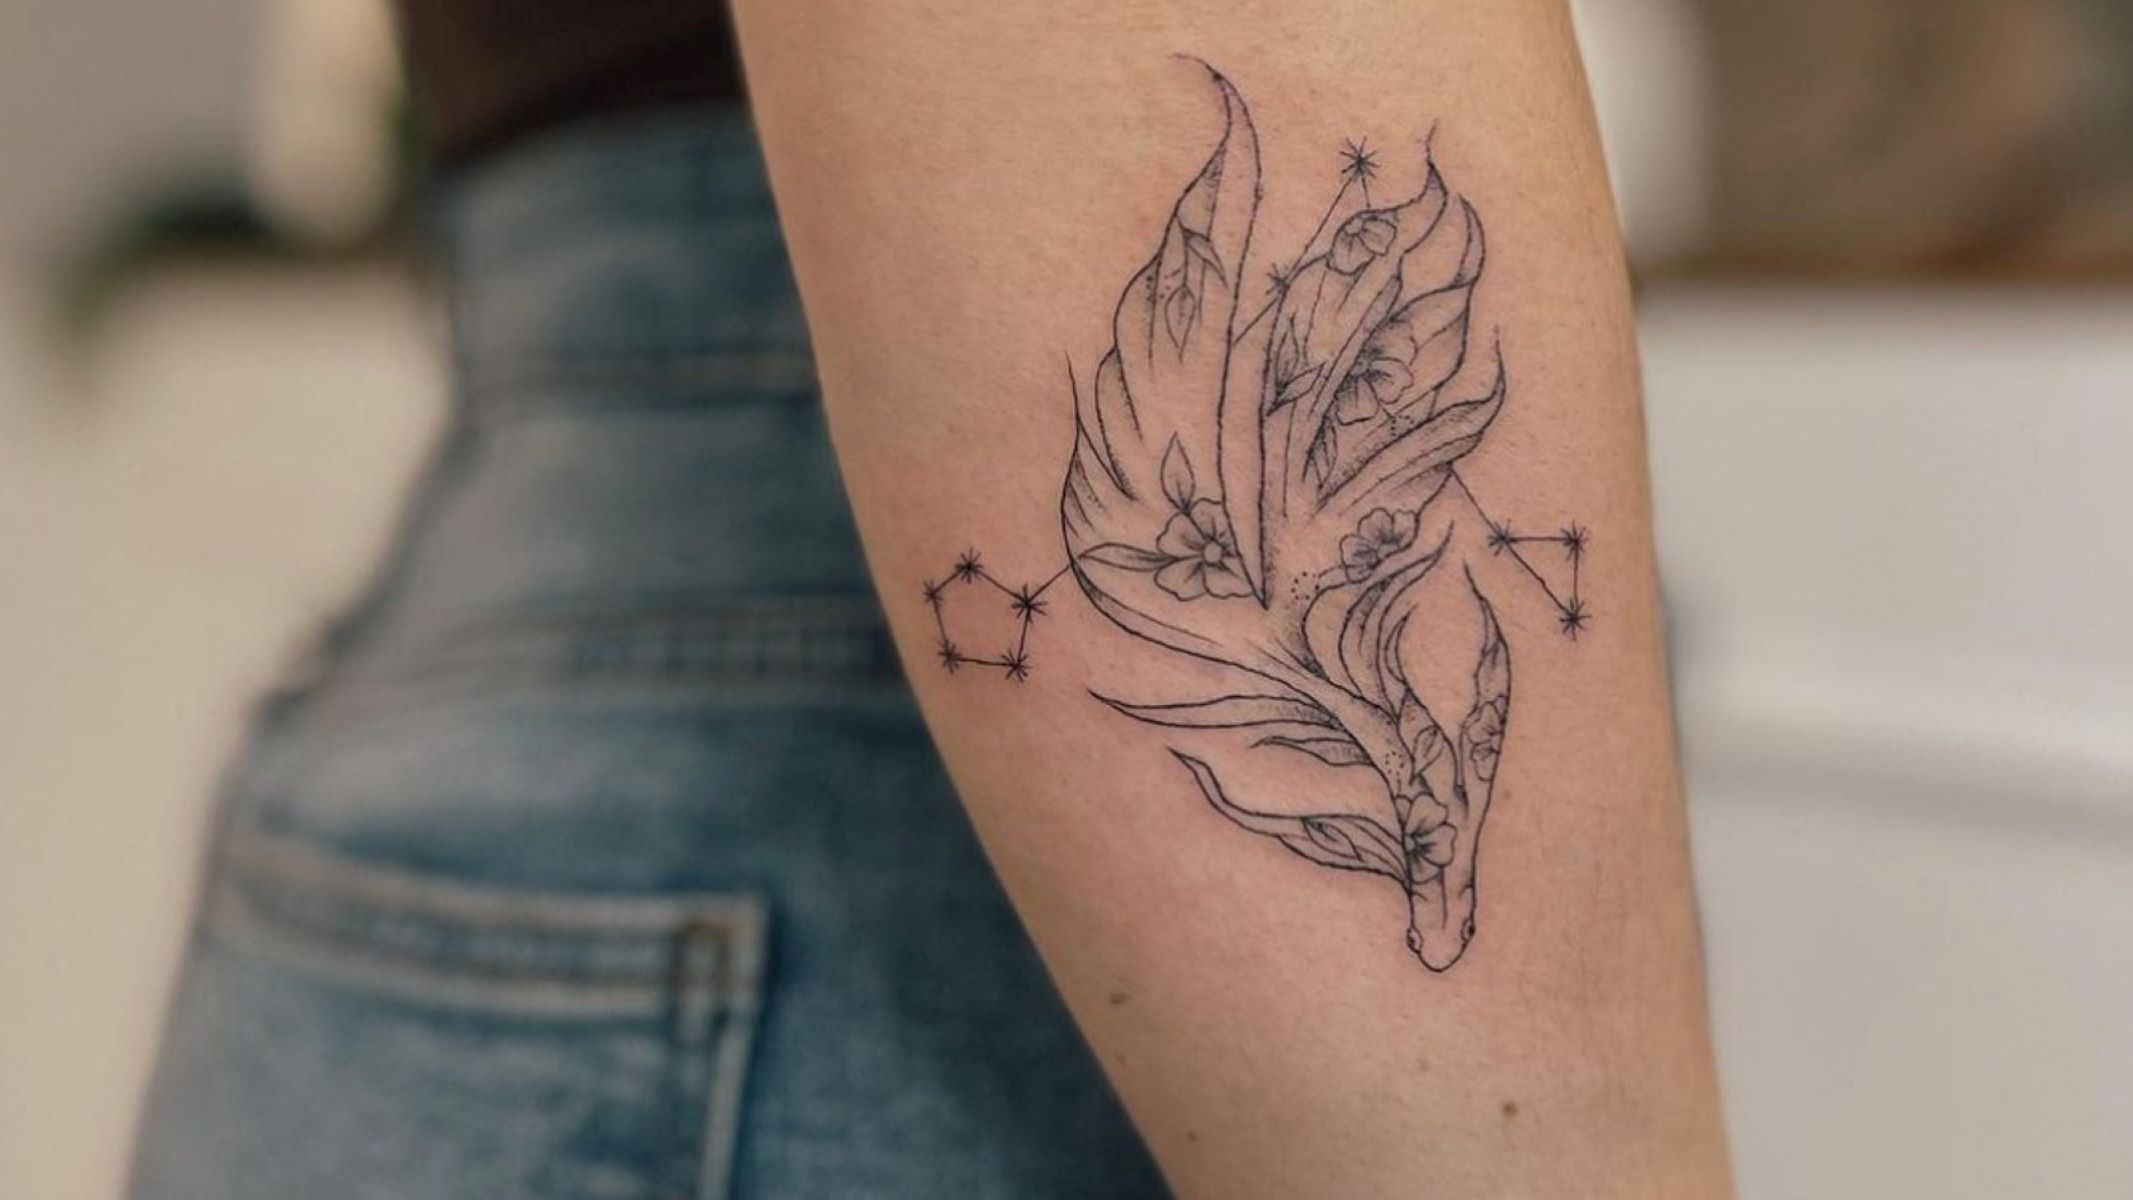 The Hidden Meanings Behind Shooting Star, Flower, And Butterfly Tattoos Revealed!